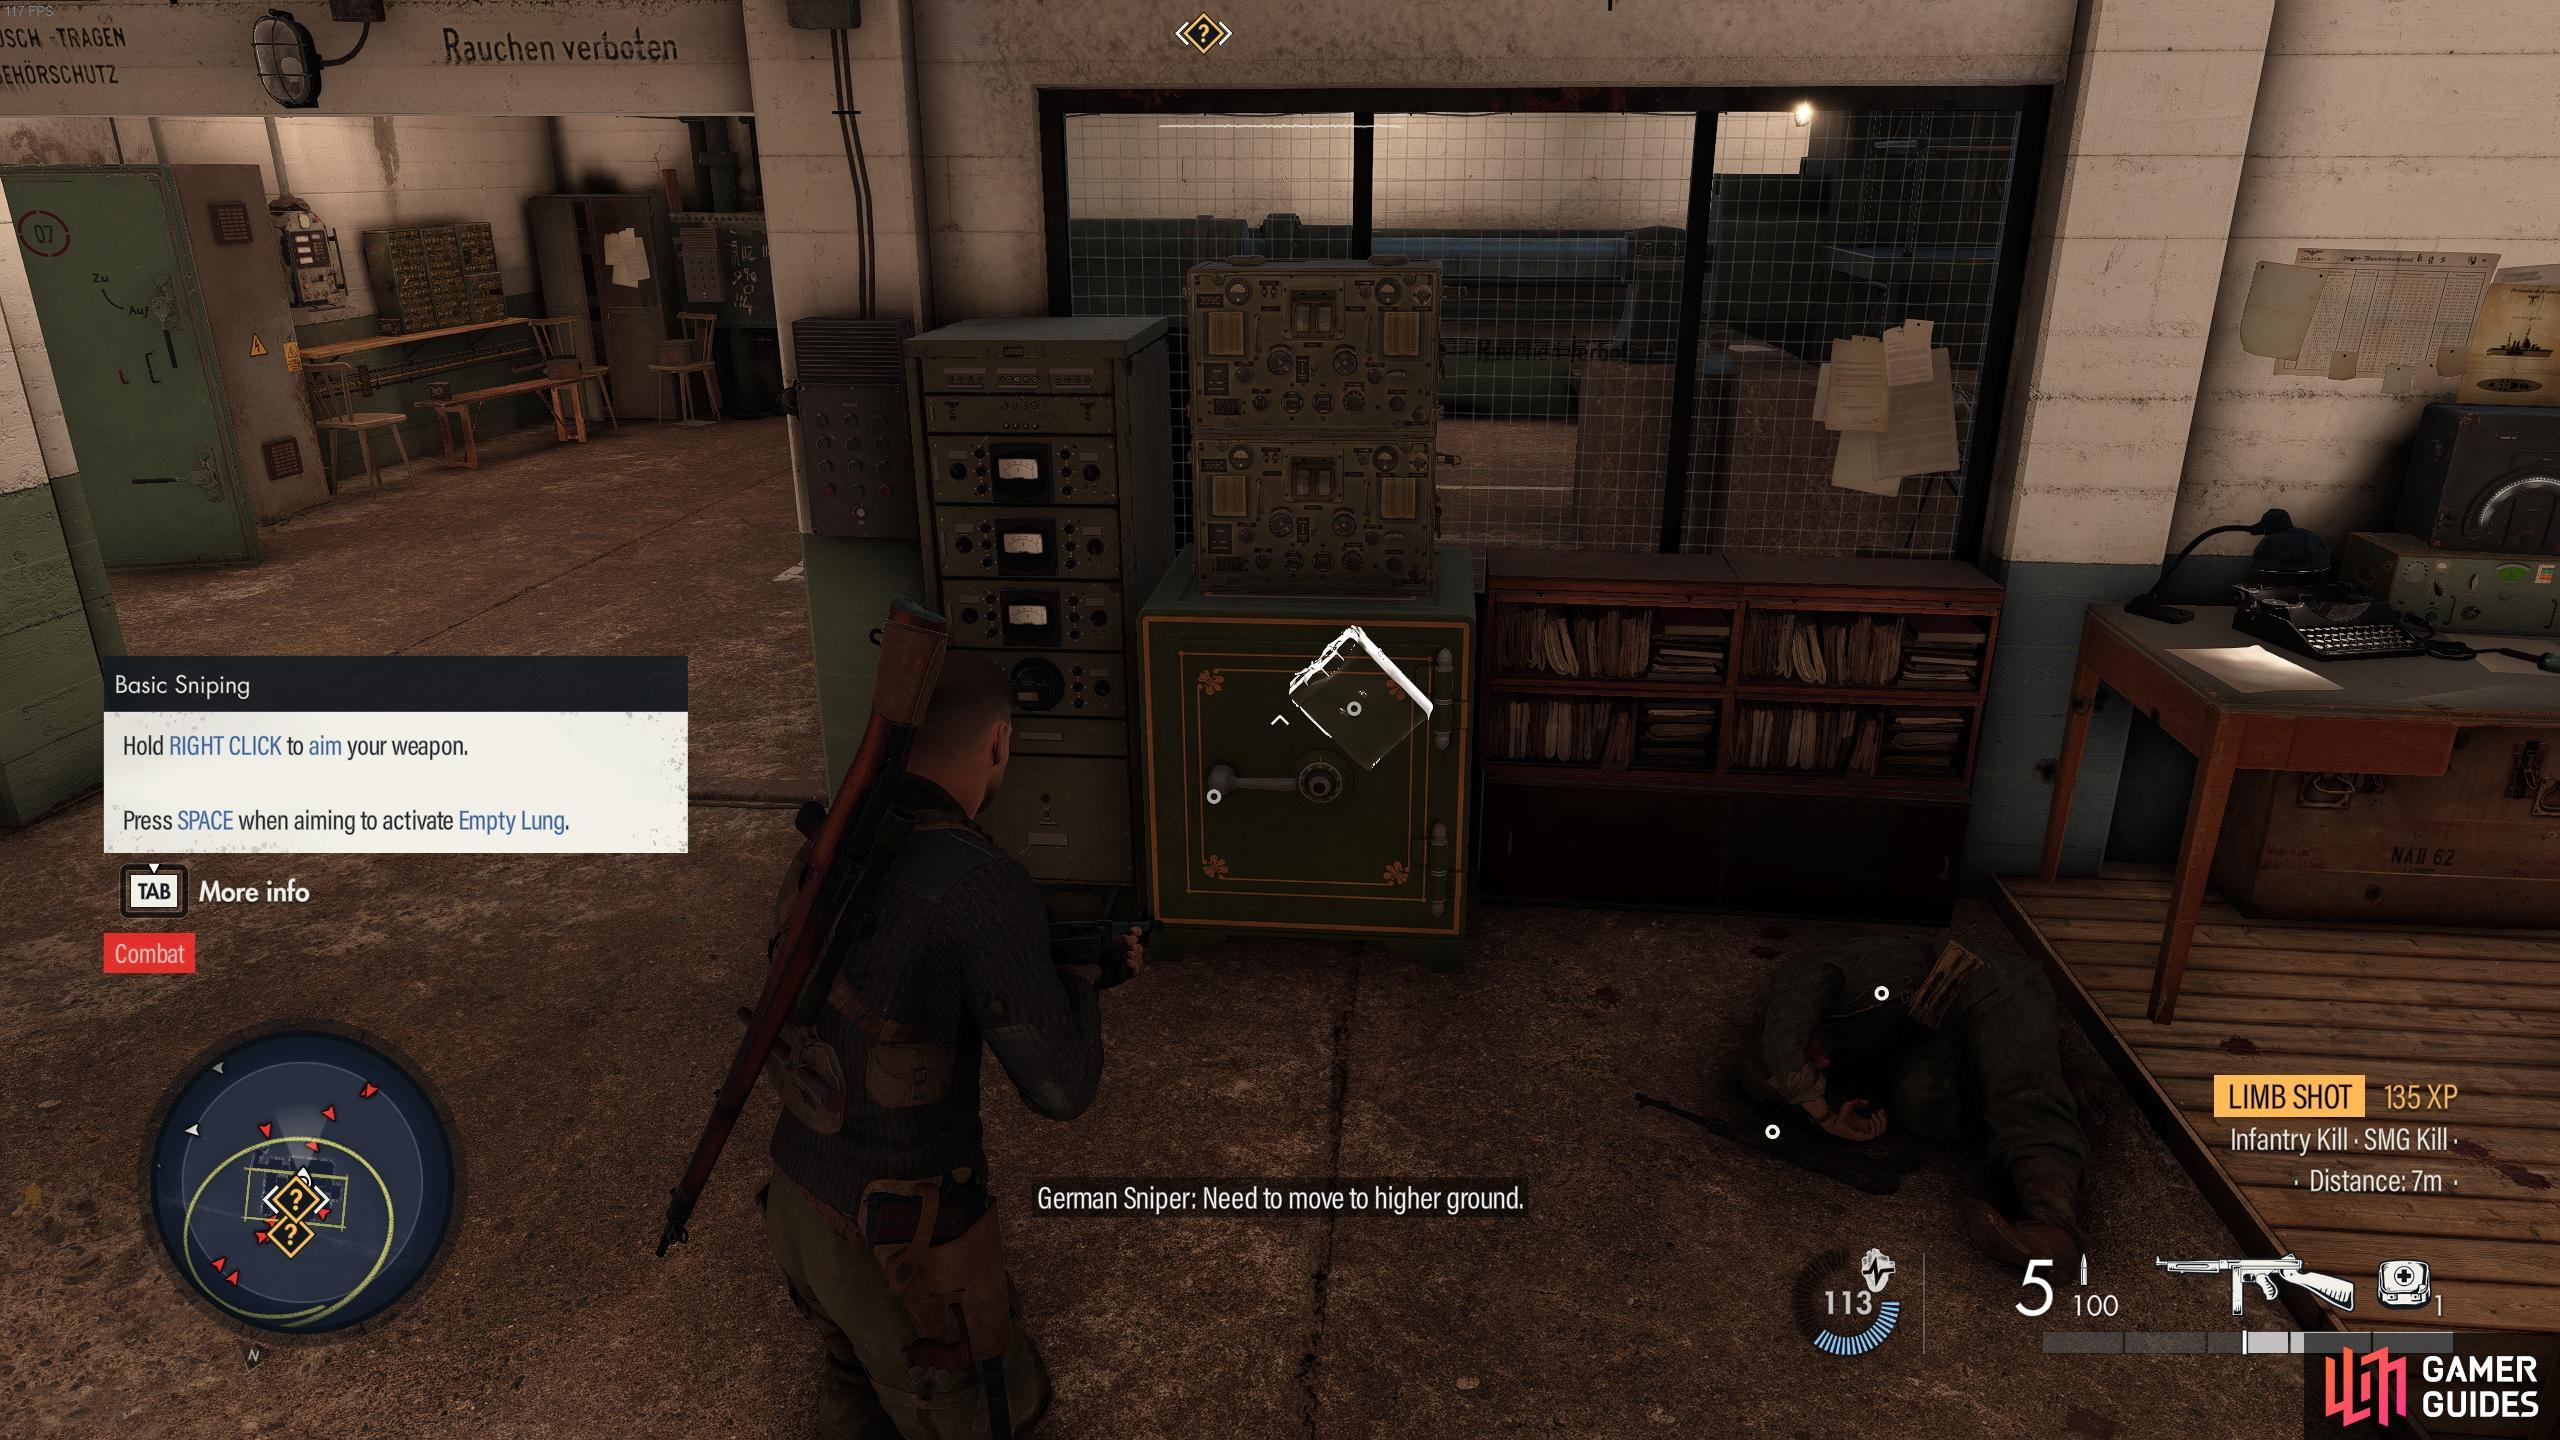 You'll find the document within the safe chest near the generator room.